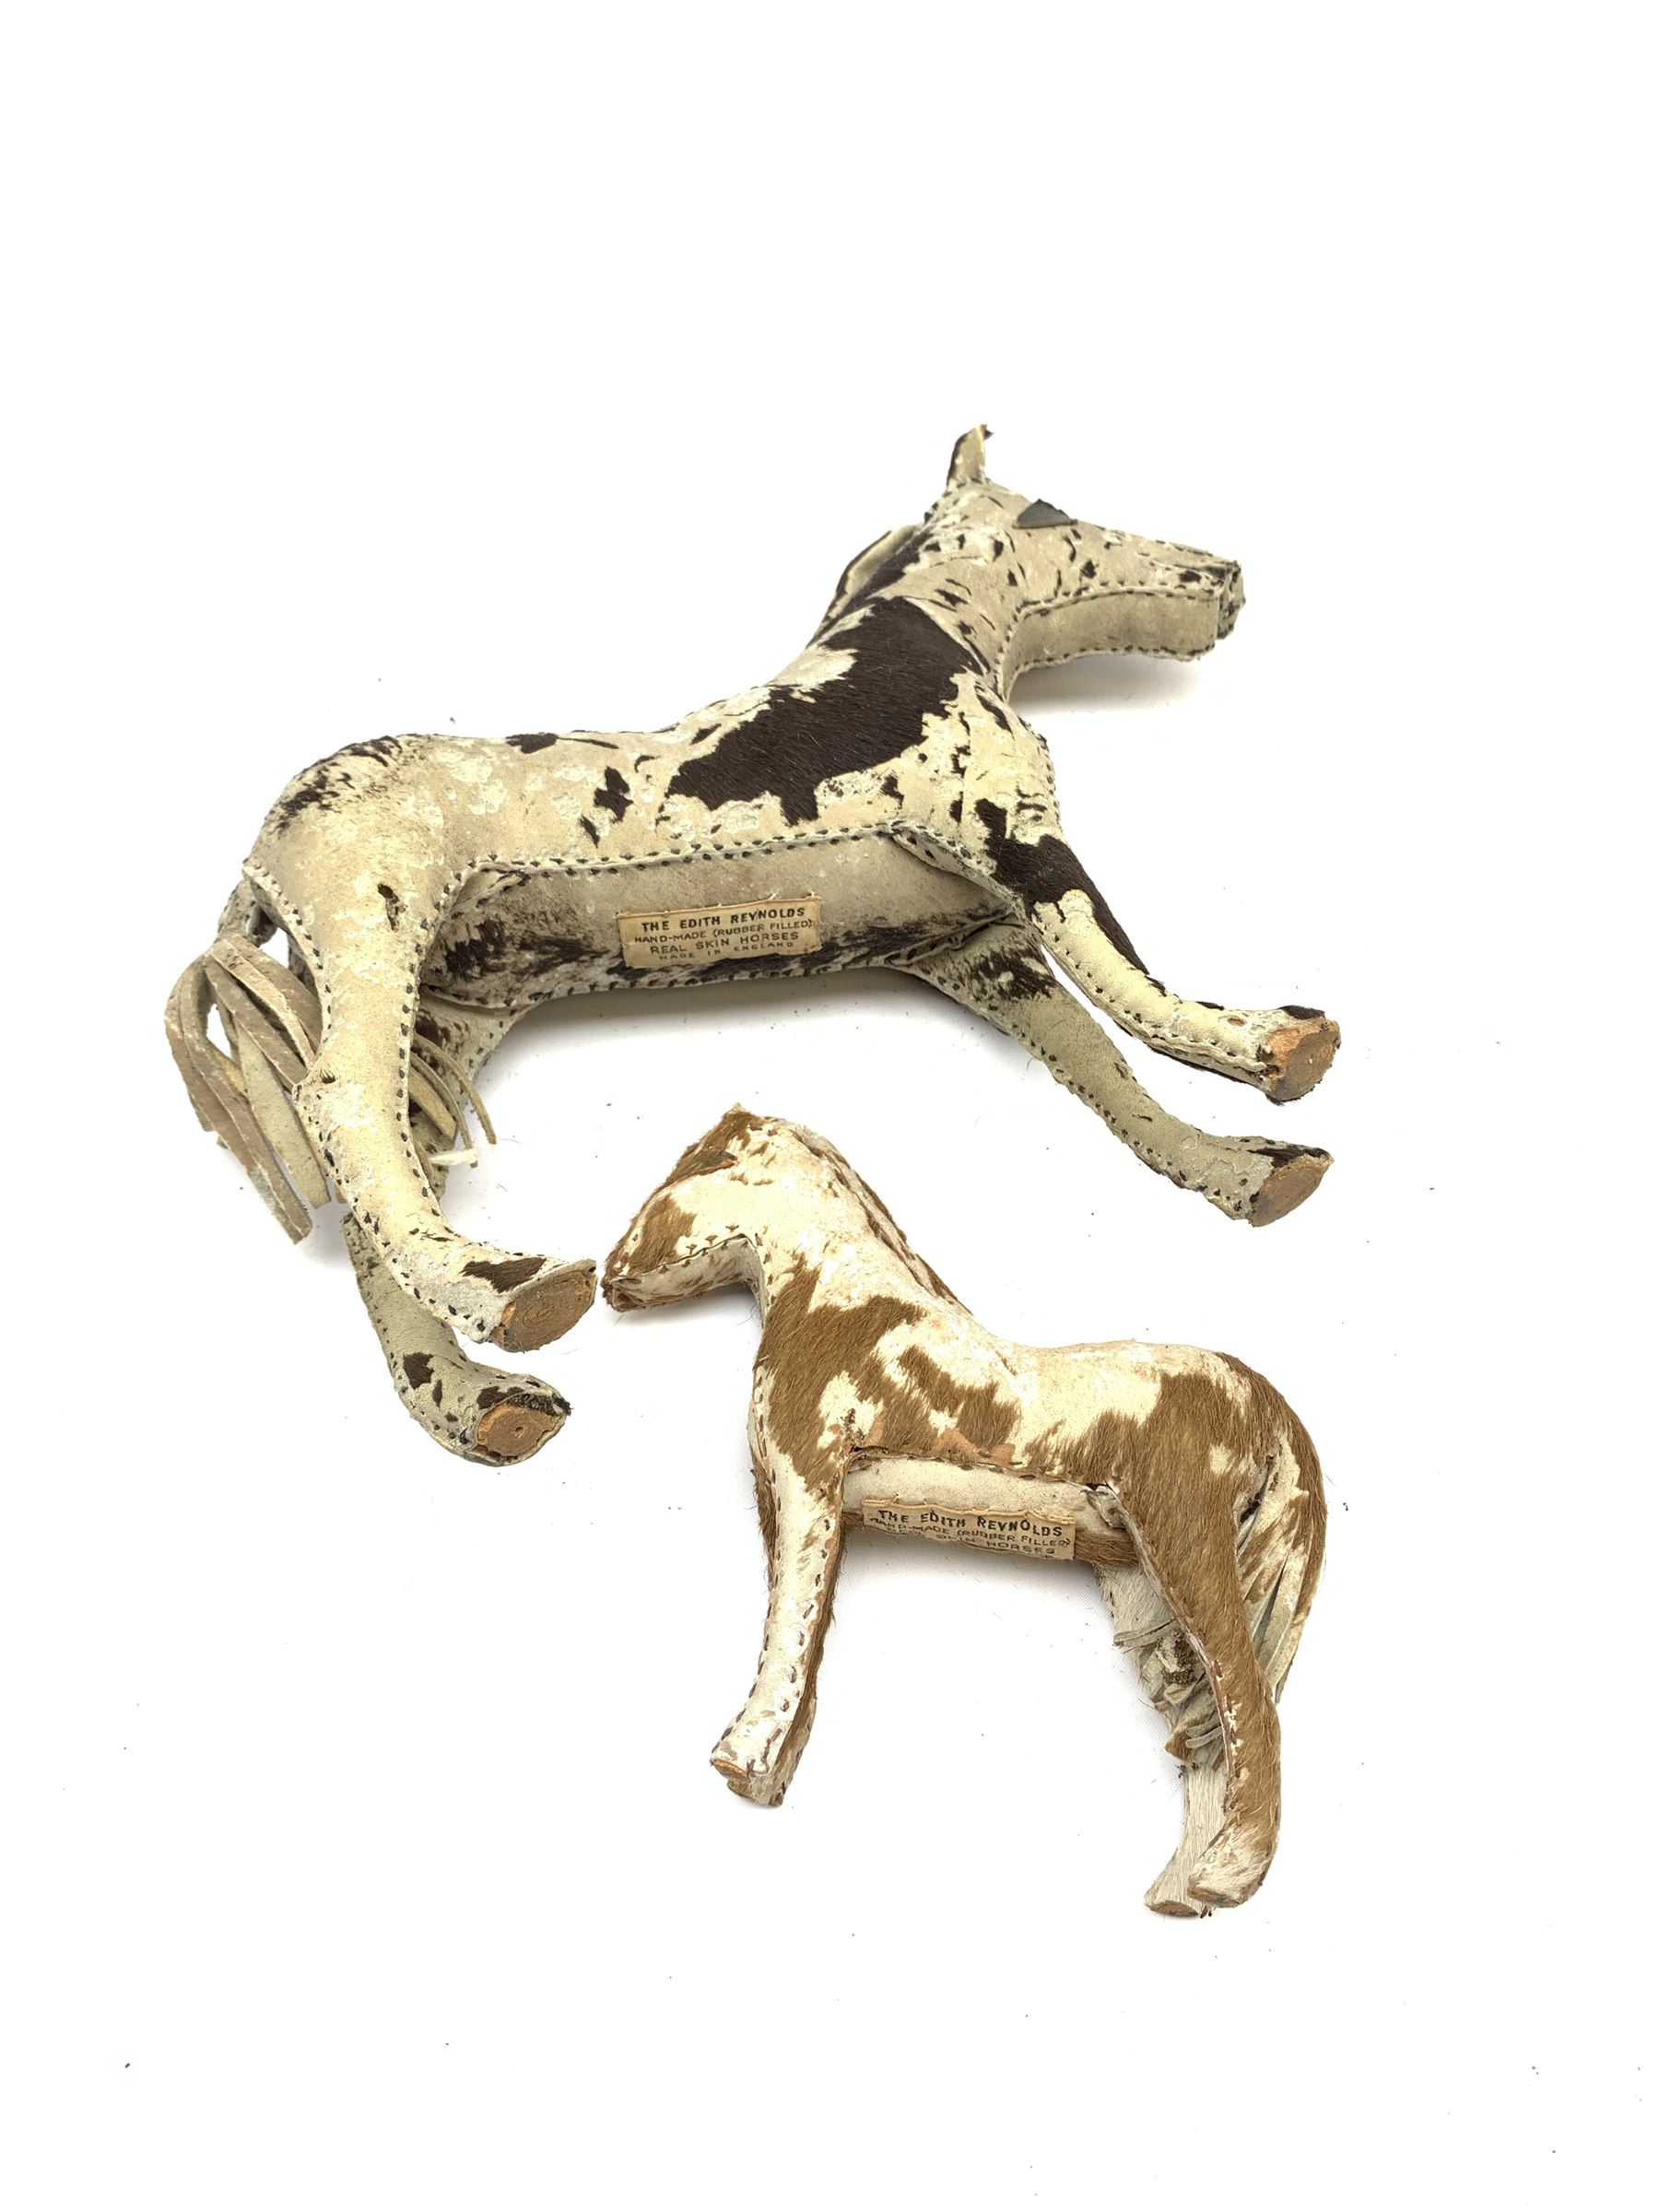 Two Edith Reynolds hand-made and rubber filled real skin horses - Image 3 of 4